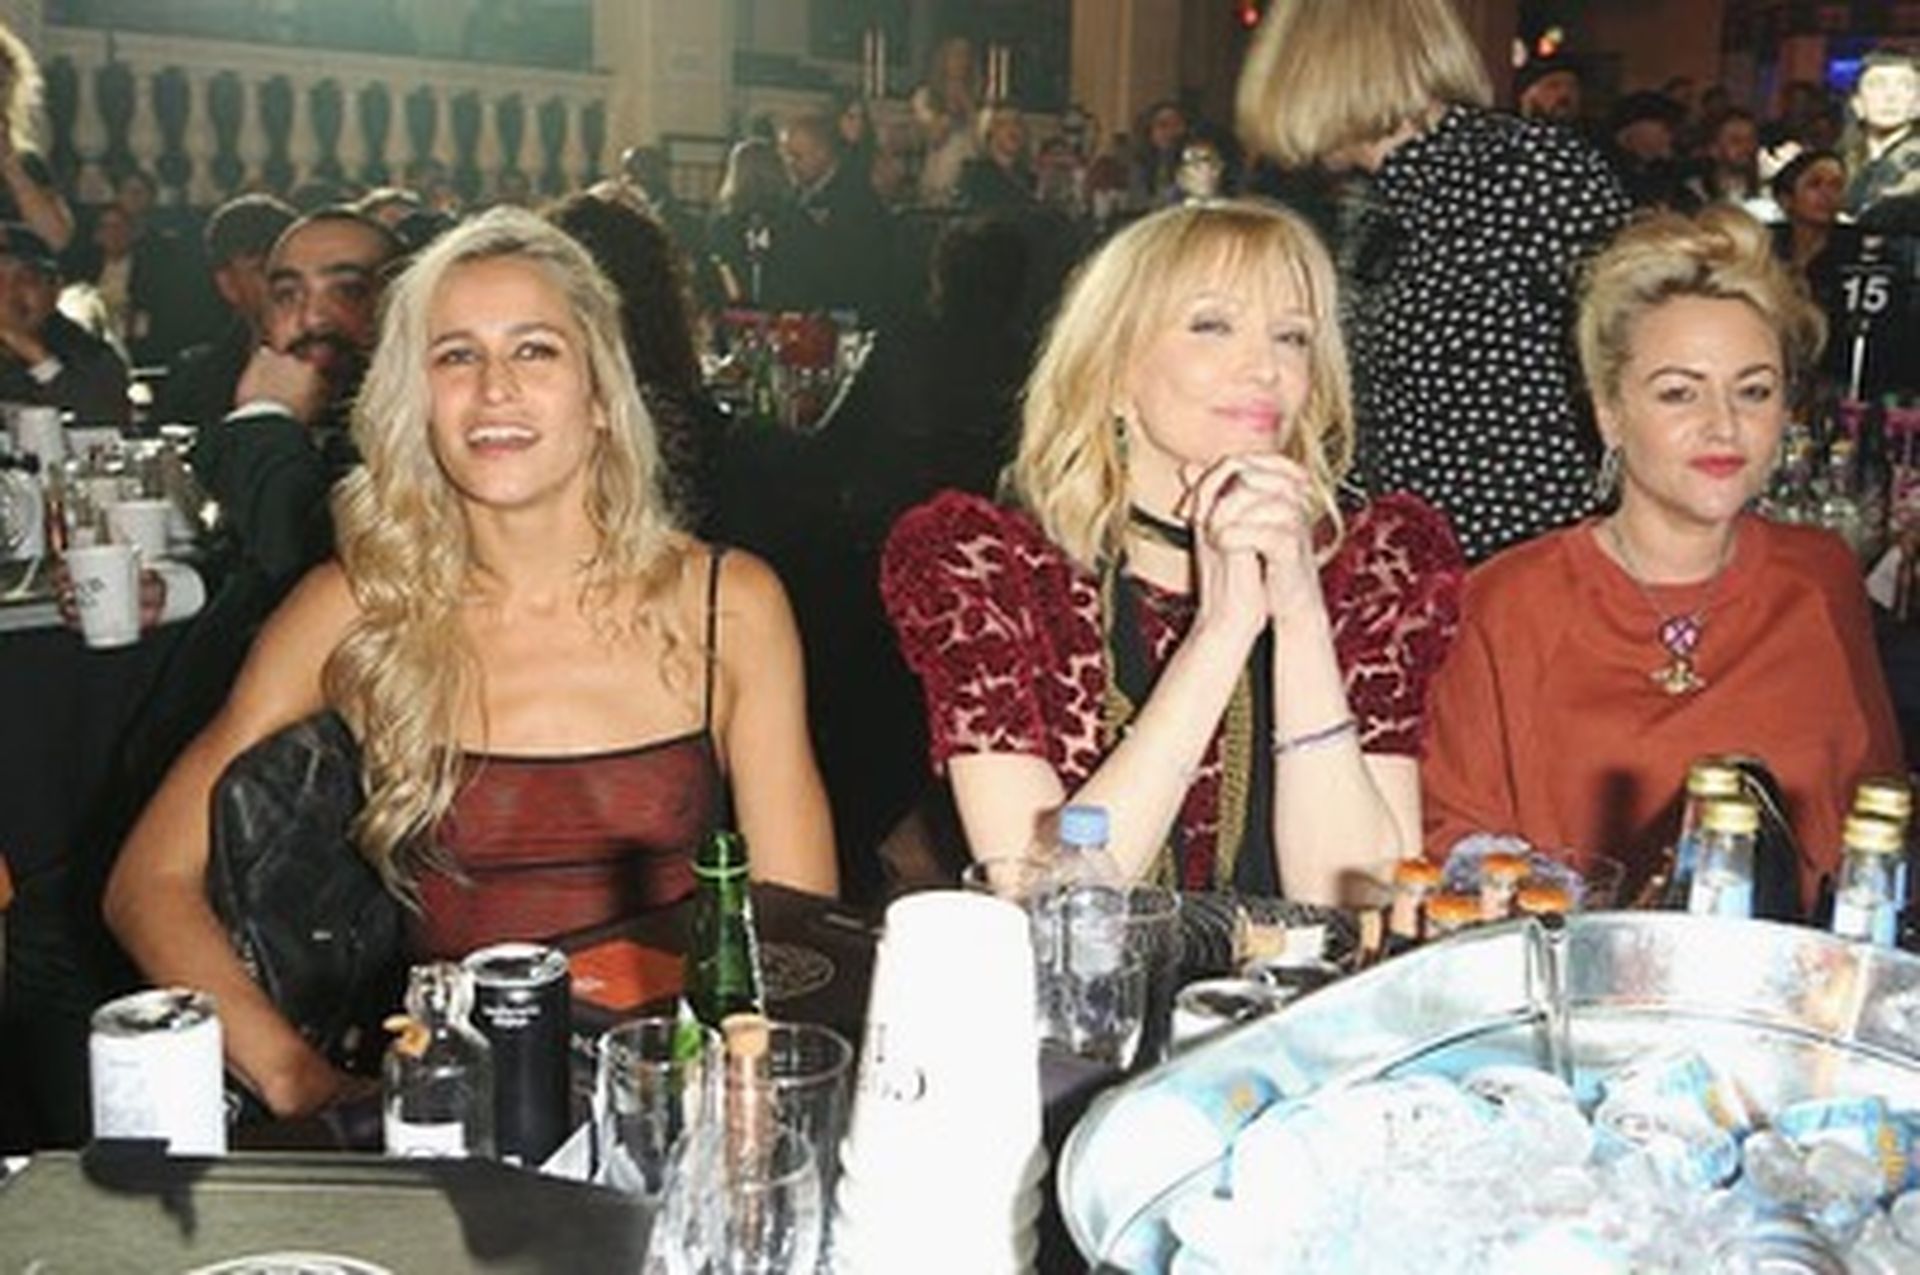 Alice Dellal Shows Her Tits at the NME Awards After Party (25 Photos)